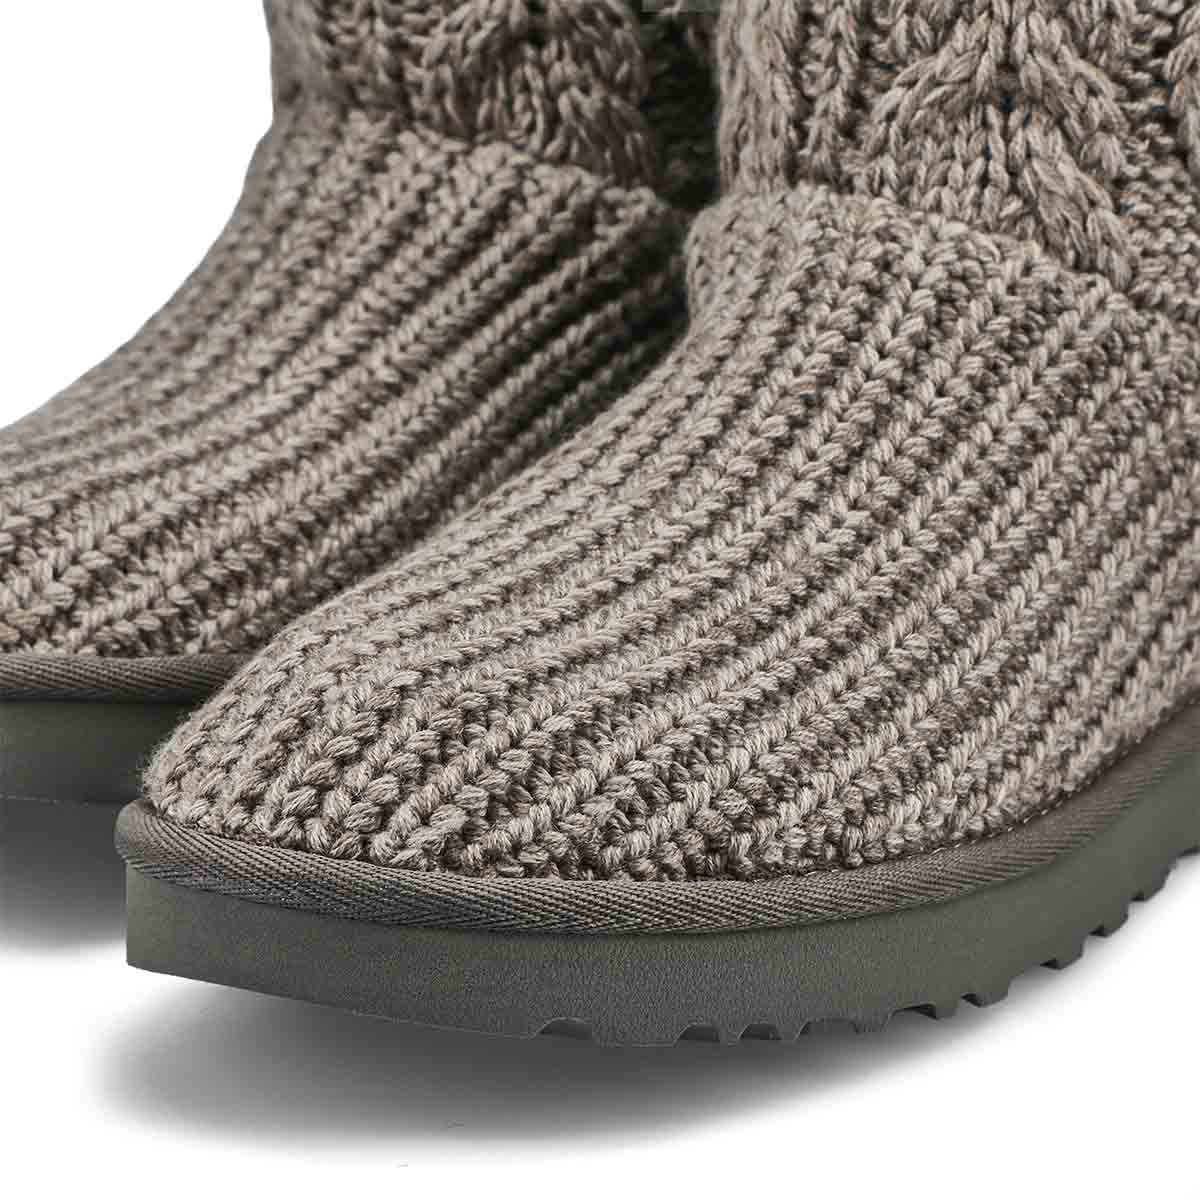 UGG Women's Classic Cardi Cabled Knit Boot - | SoftMoc.com